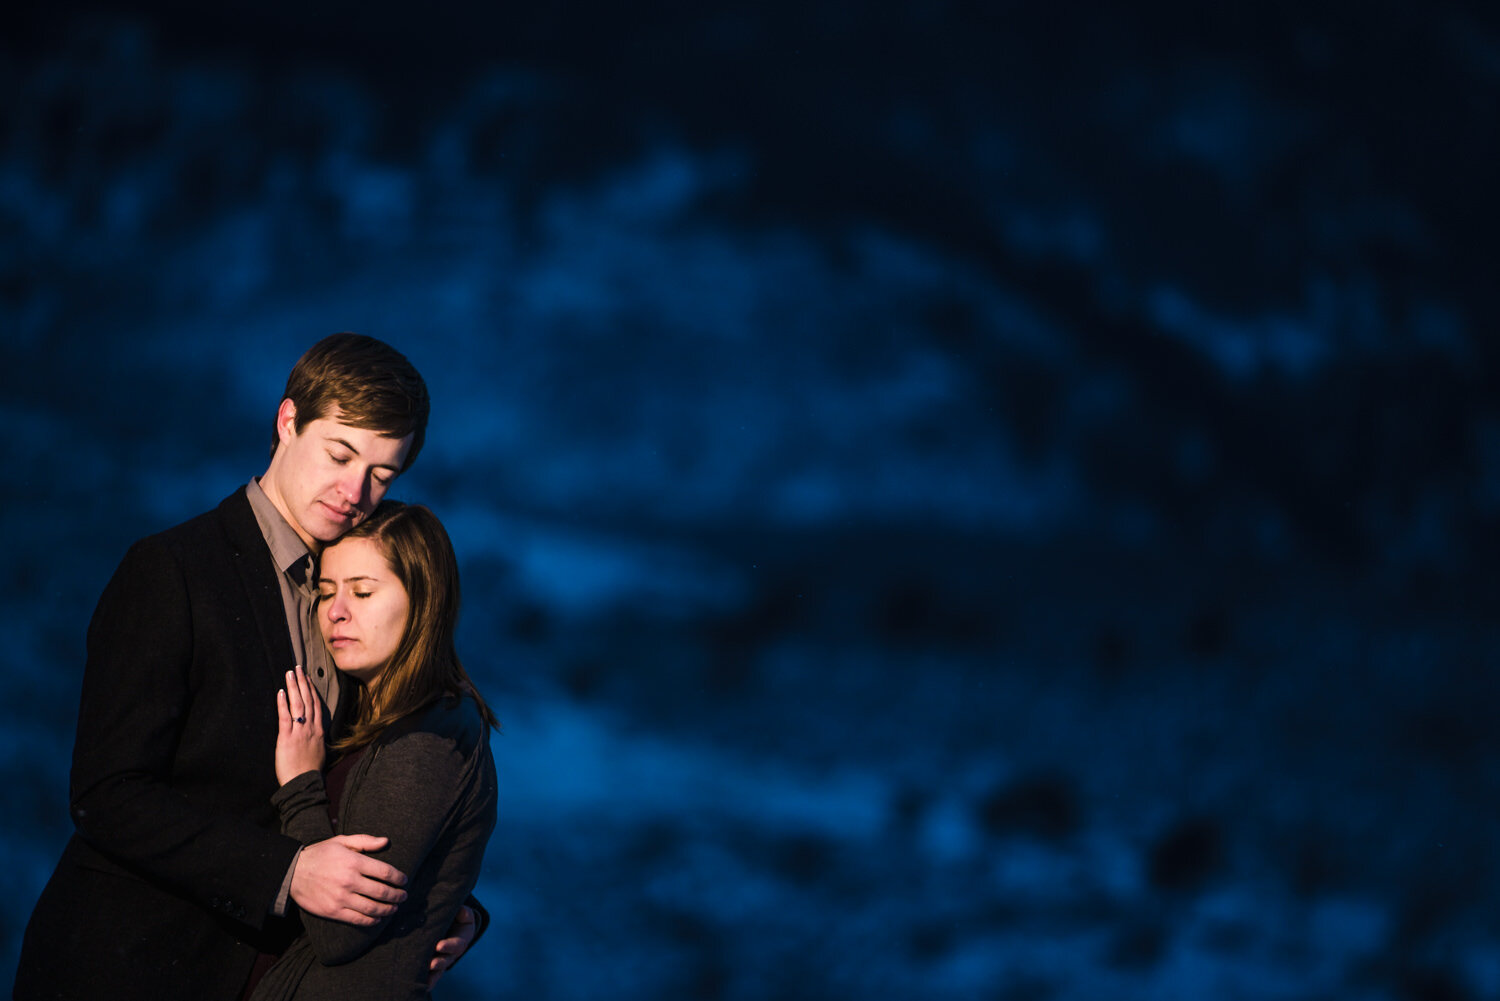  Winter snowy engagement pictures taken at the Horsetooth Reservoir in Fort Collins Colorado. Photographed by JMGant Photography. 